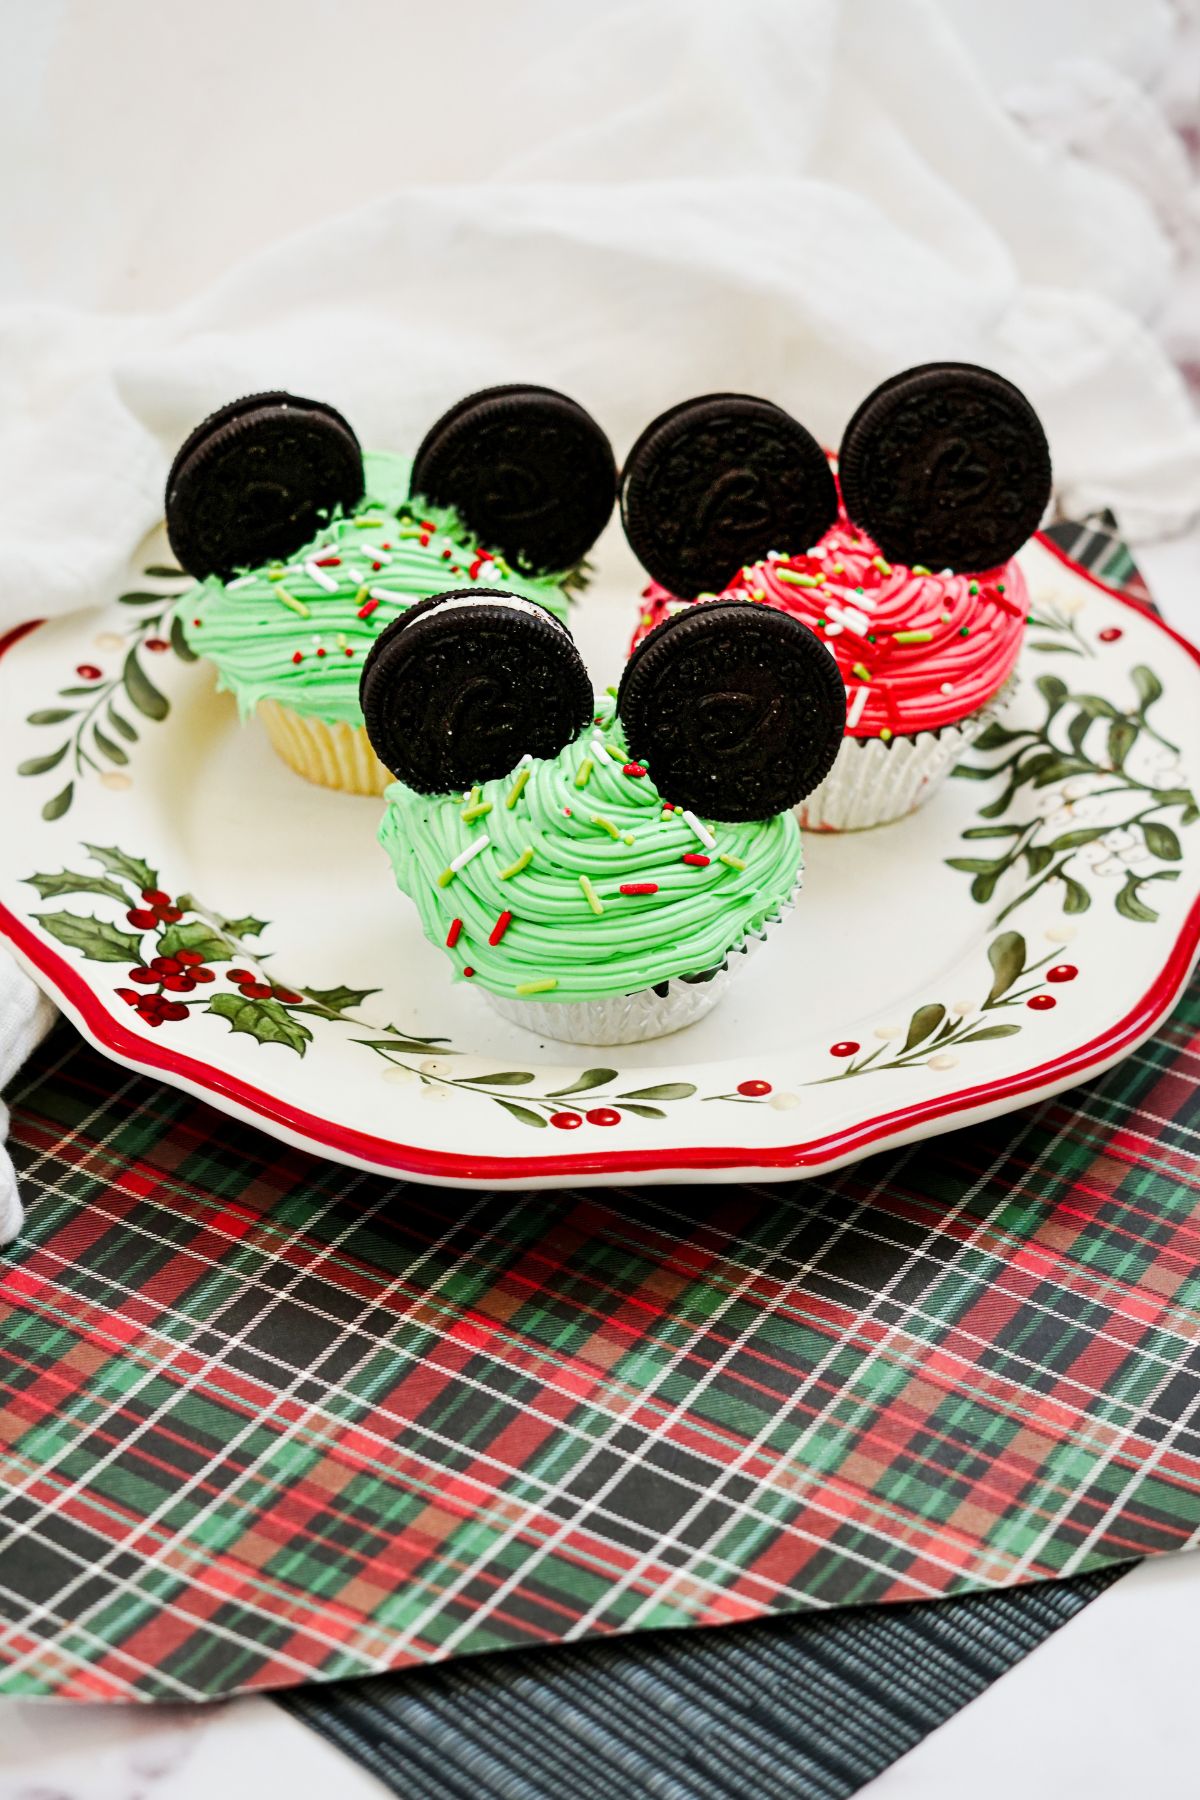 Plate with Green and Red Mickey Mouse Cupcakes for Christmas.